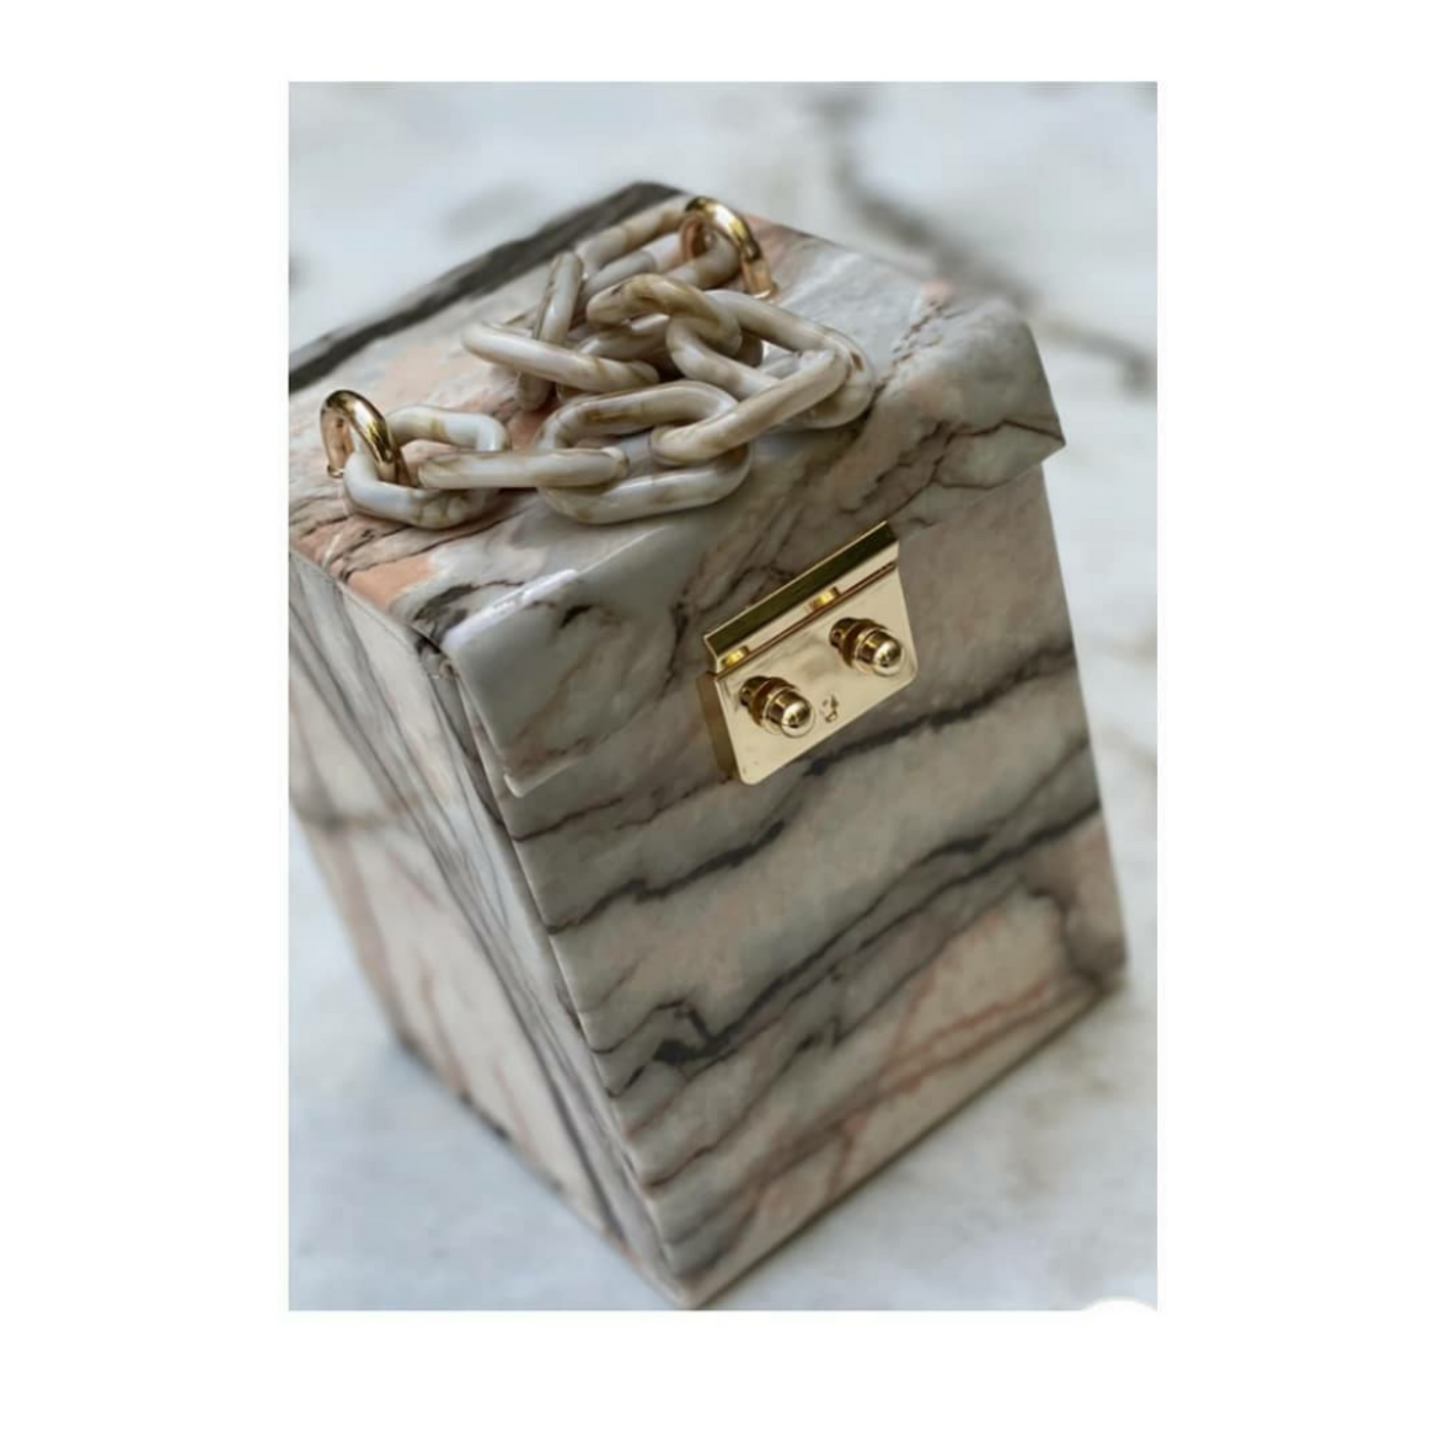 Marble Box Clutch (Restocked - 2 Options)